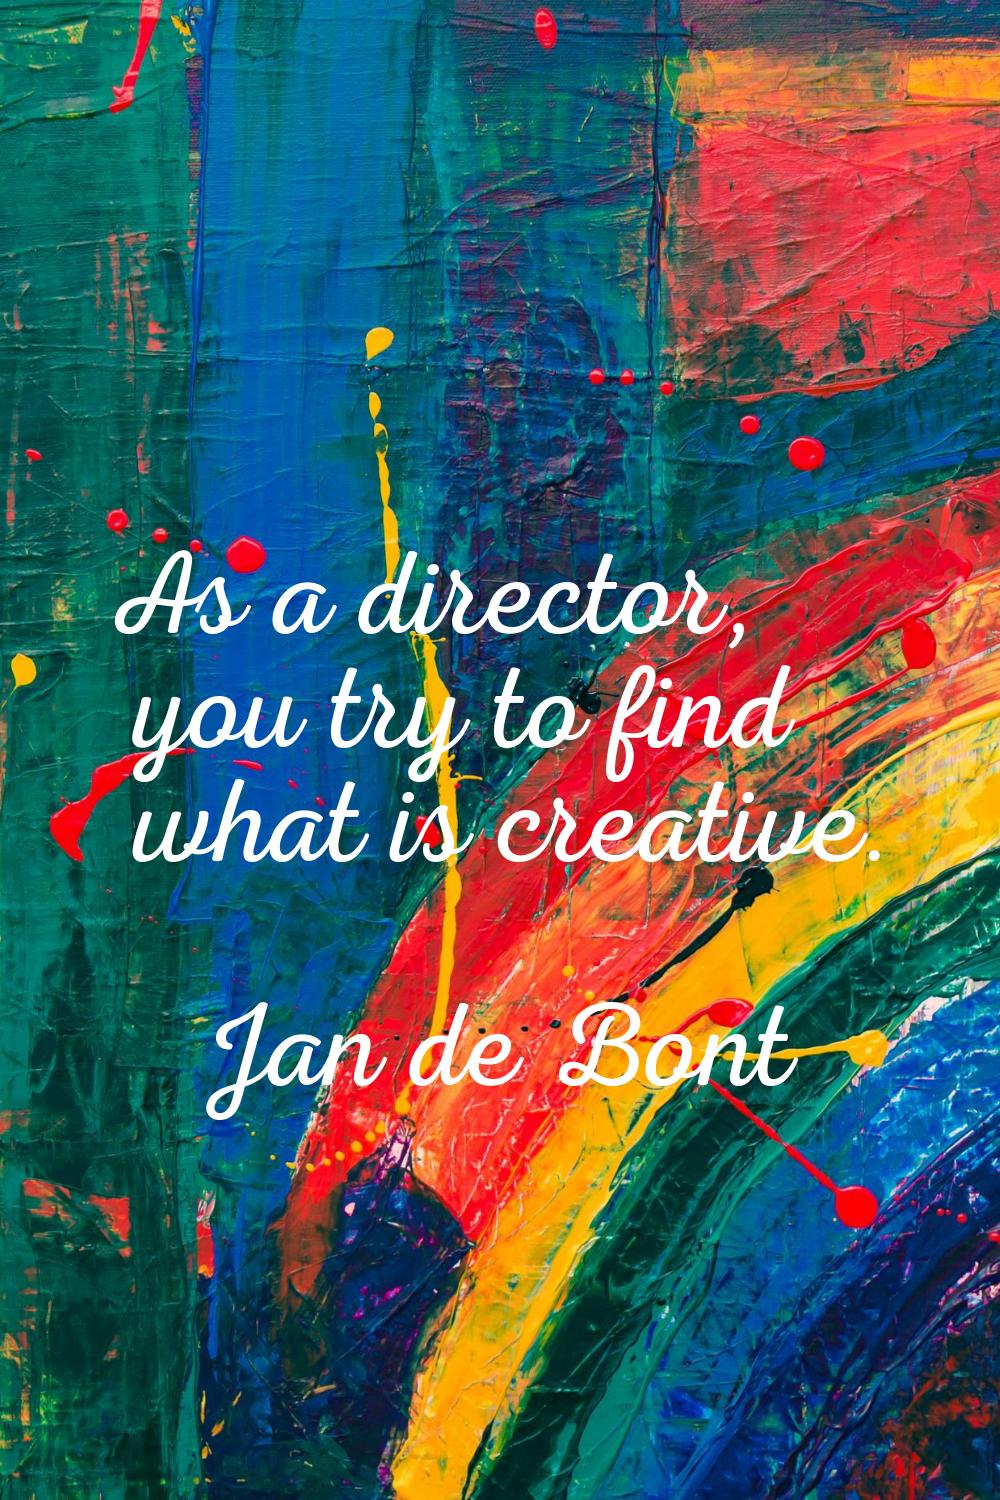 As a director, you try to find what is creative.